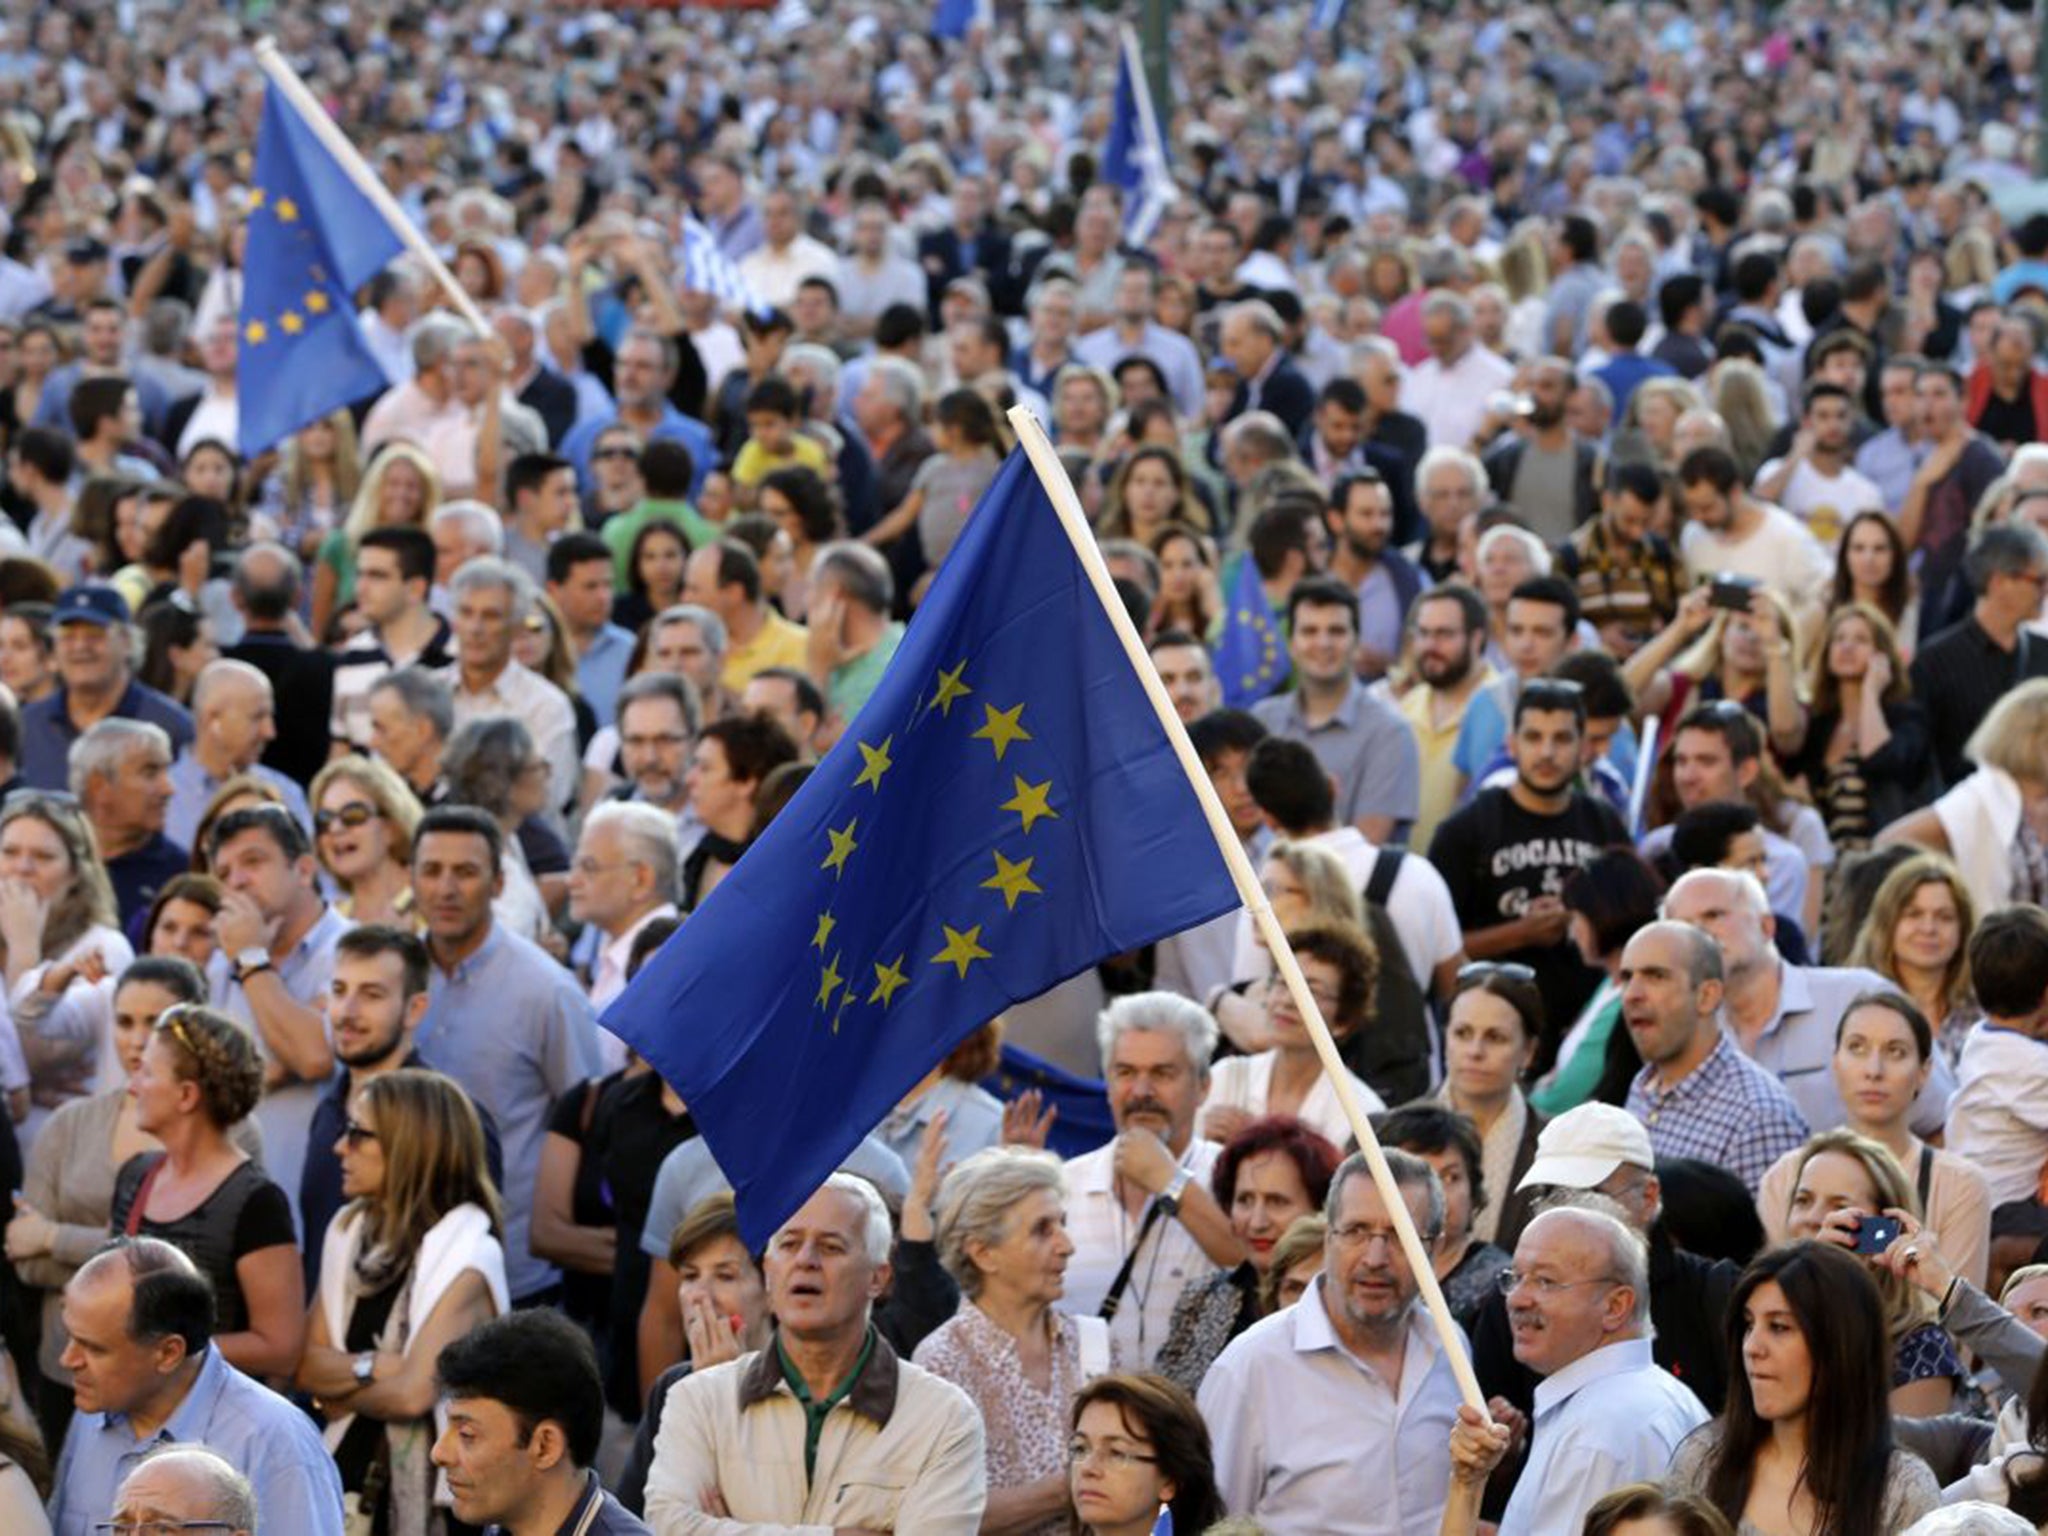 Pro-Euro demonstrators outside the Greek Parliament during a rally in Athens. Thousands of people gathered to show support for the country's future in the EU